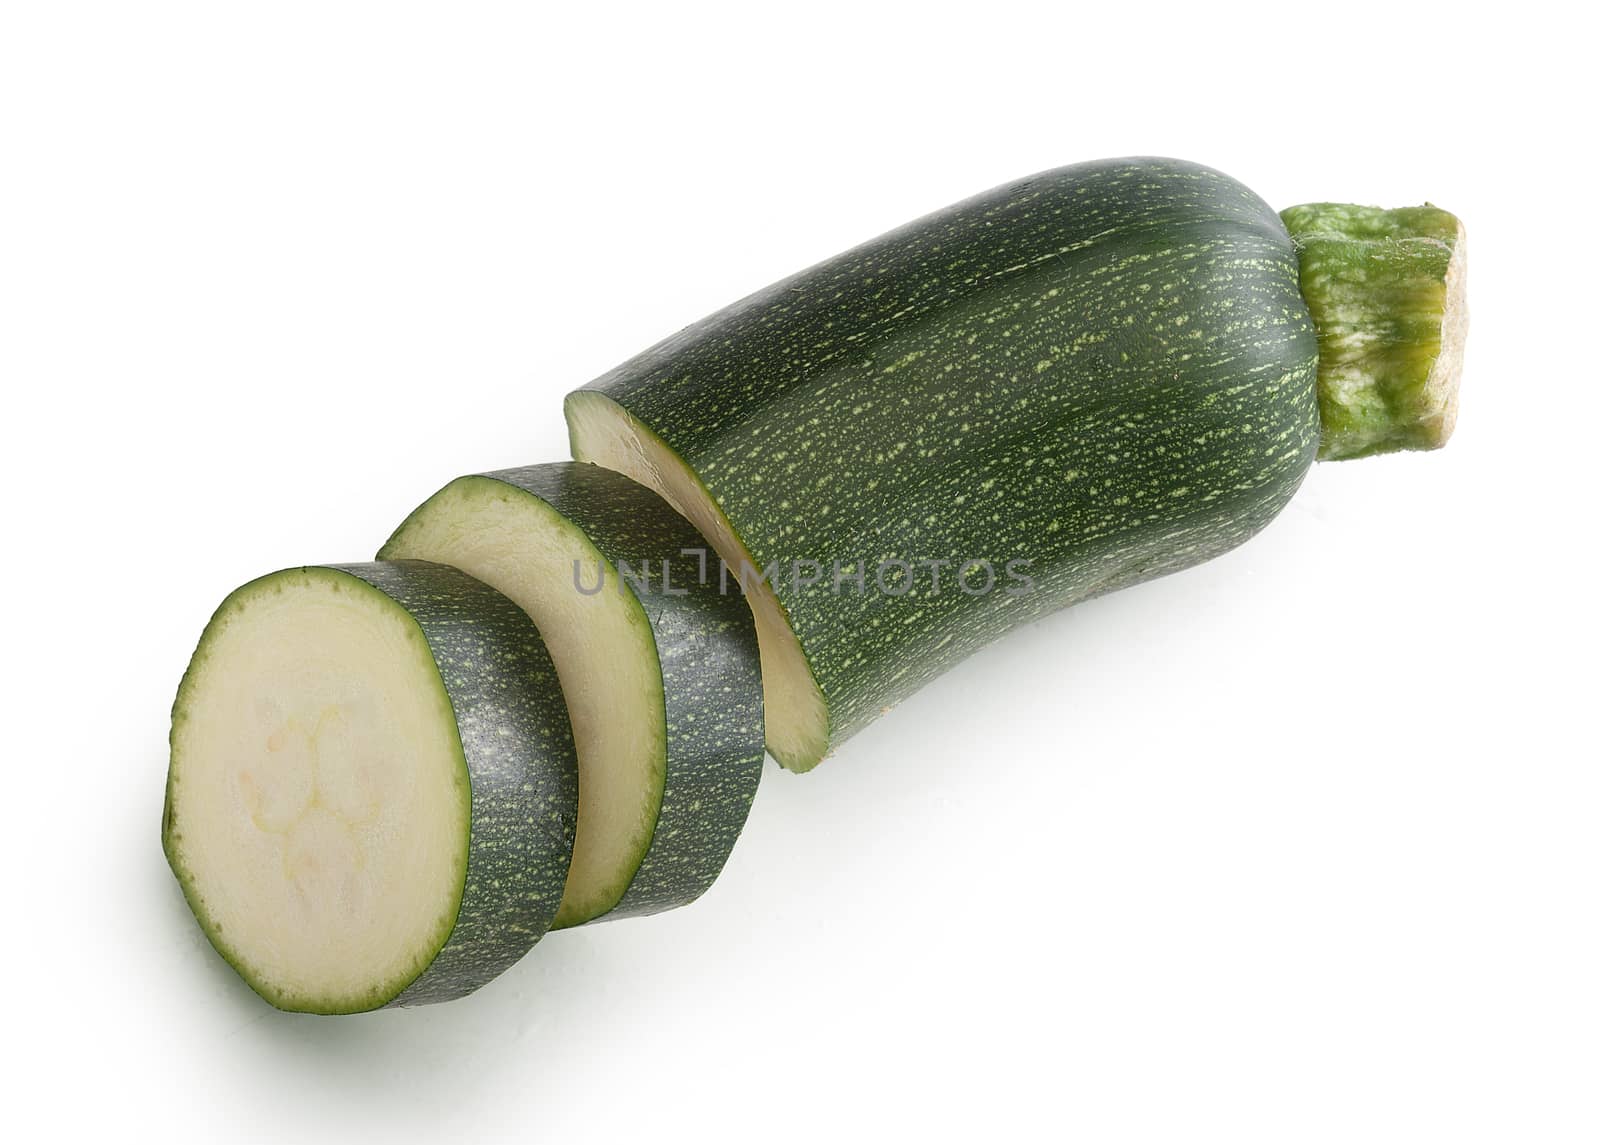 Pieces of zucchini by Angorius